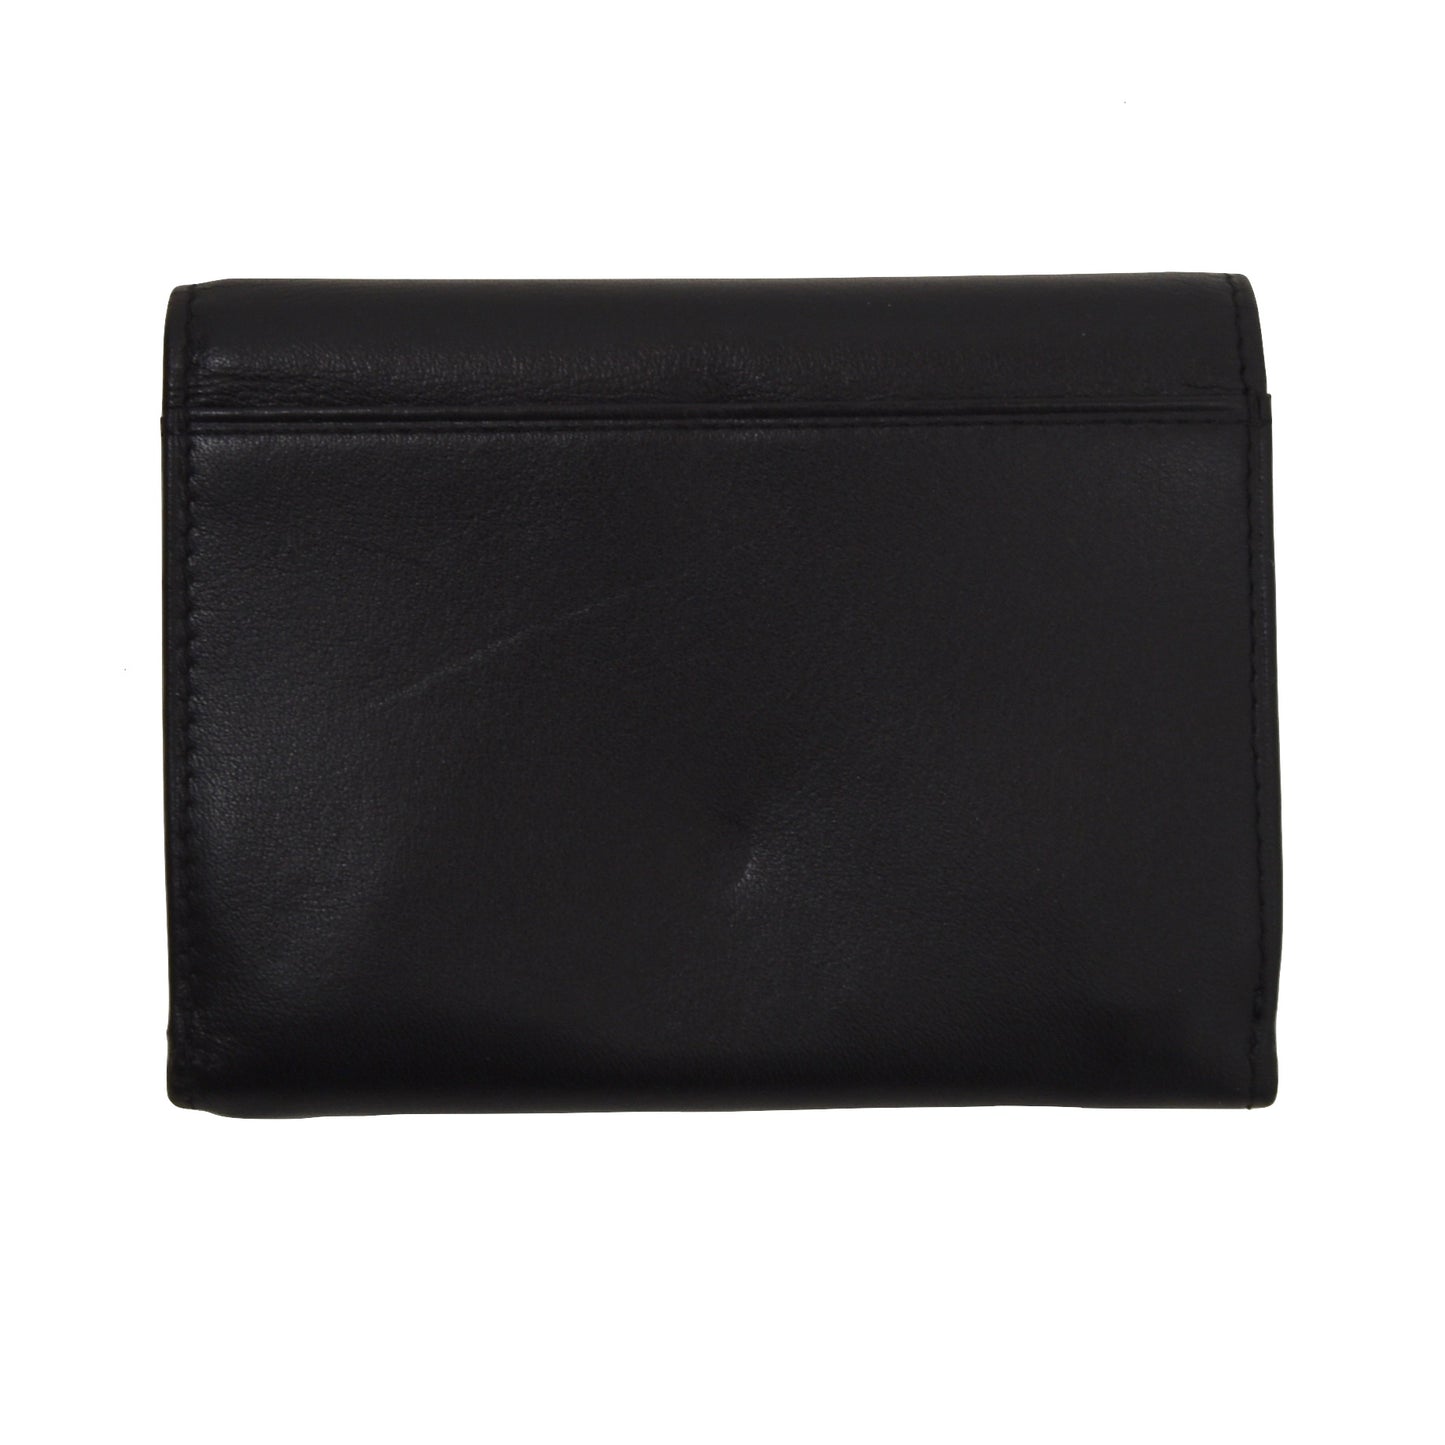 Becker Handmade Germany Wallet With Coin Pouch - Black